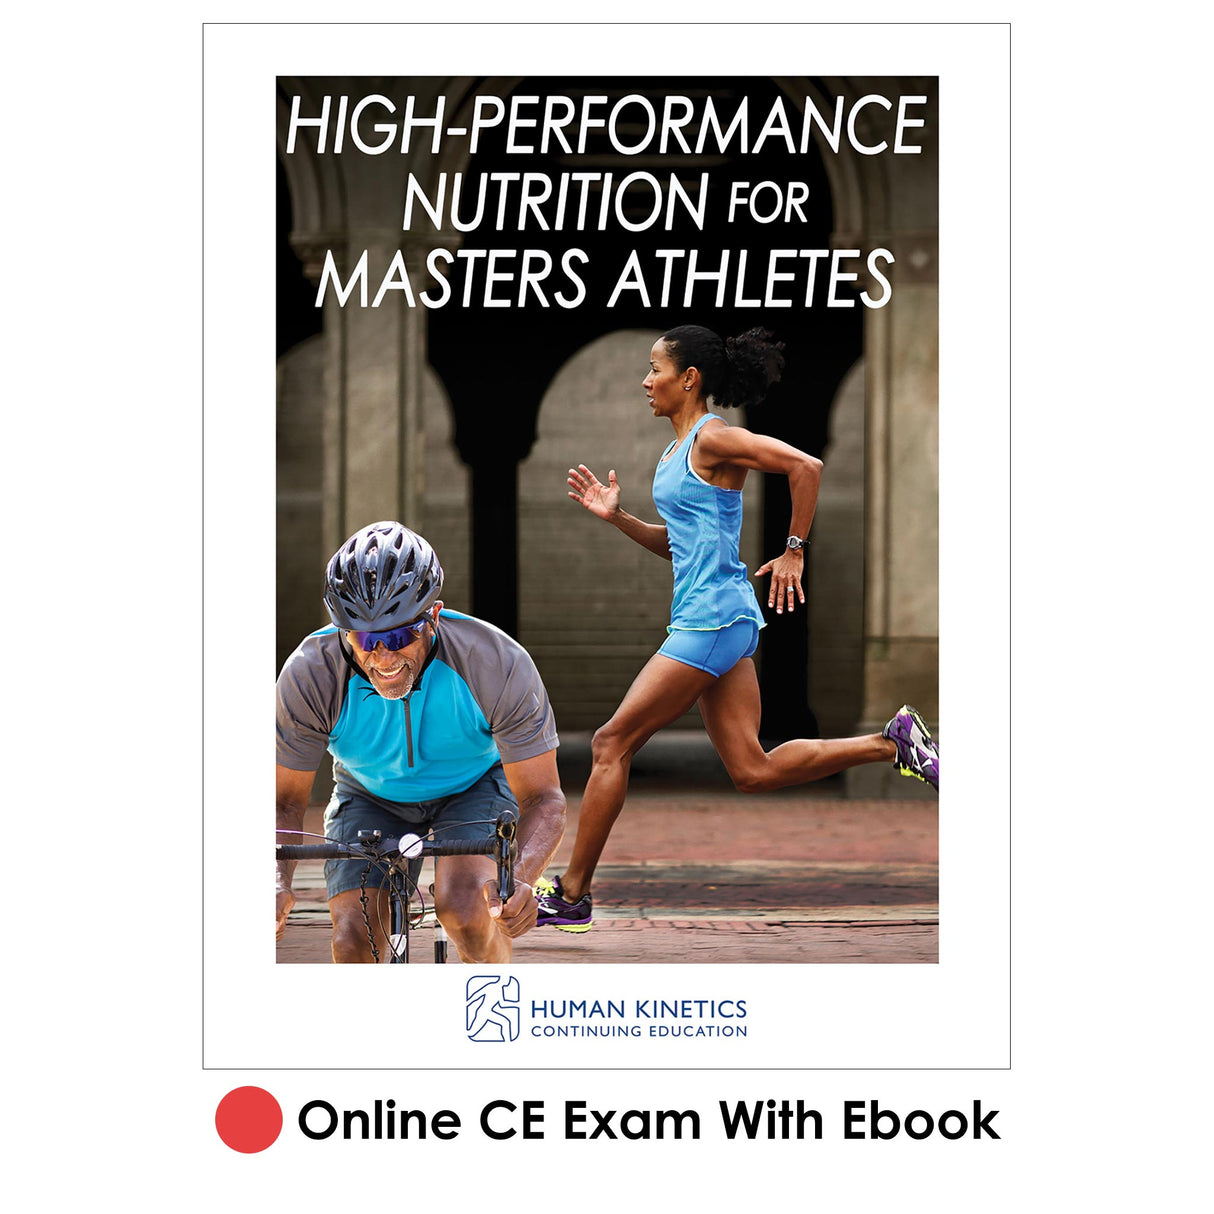 High-Performance Nutrition for Masters Athletes Online CE Exam With Ebook